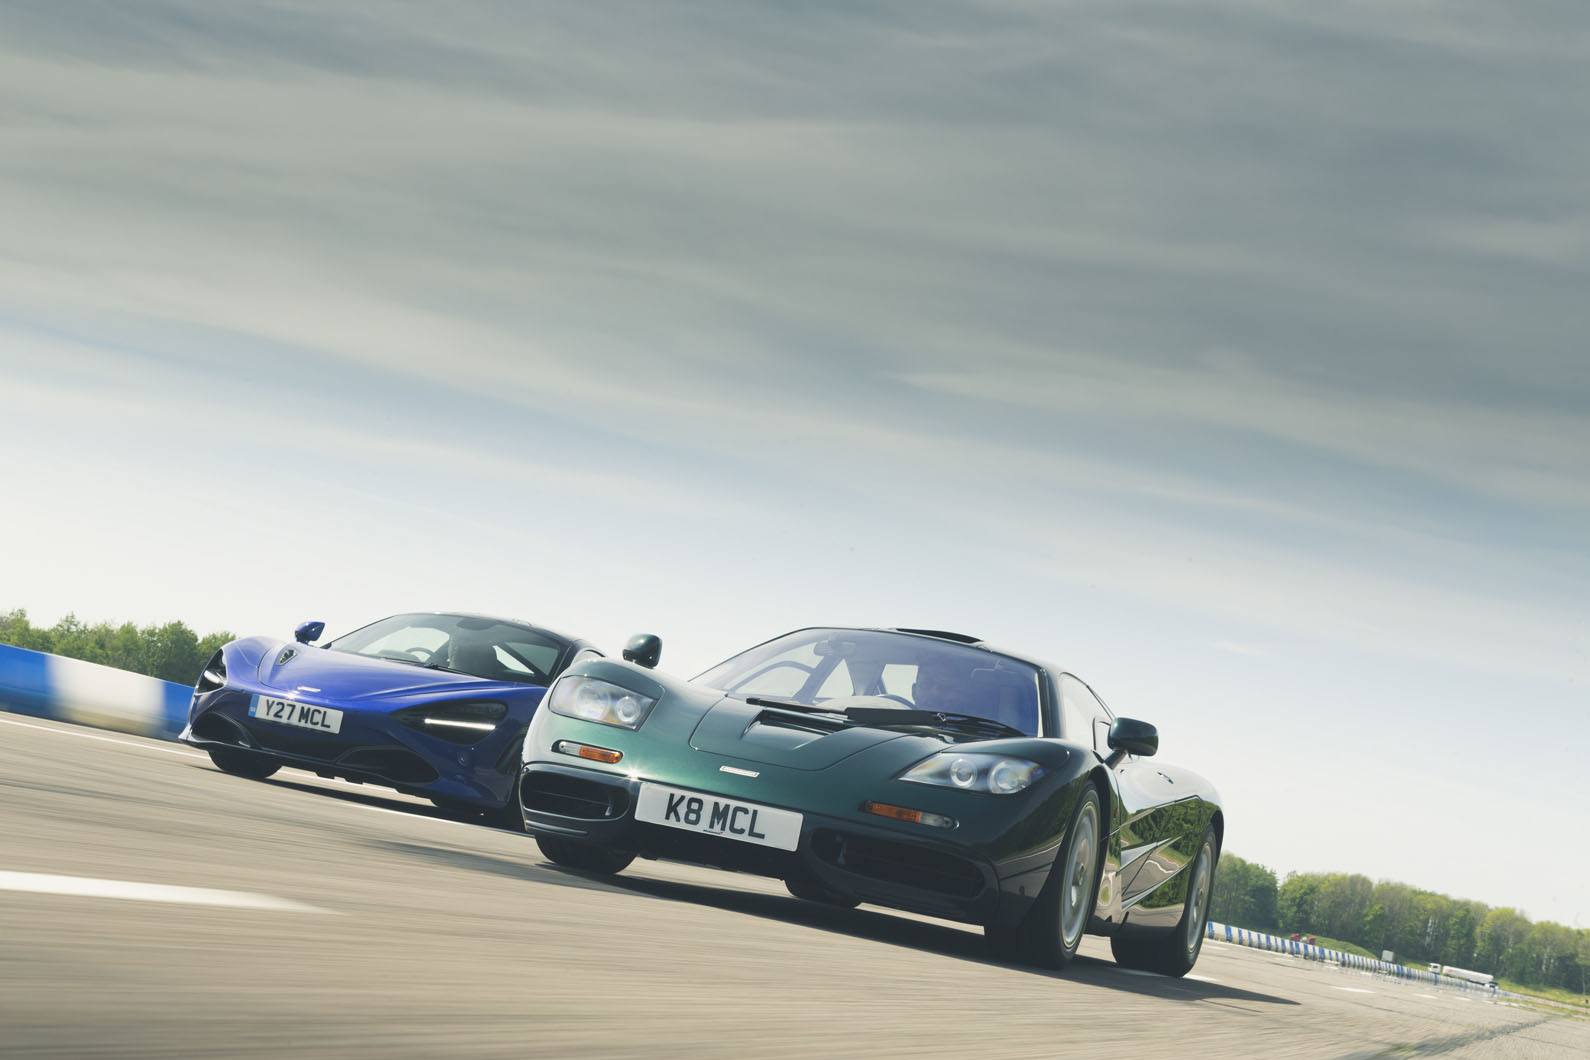 Used McLaren F1 1992-1998 review